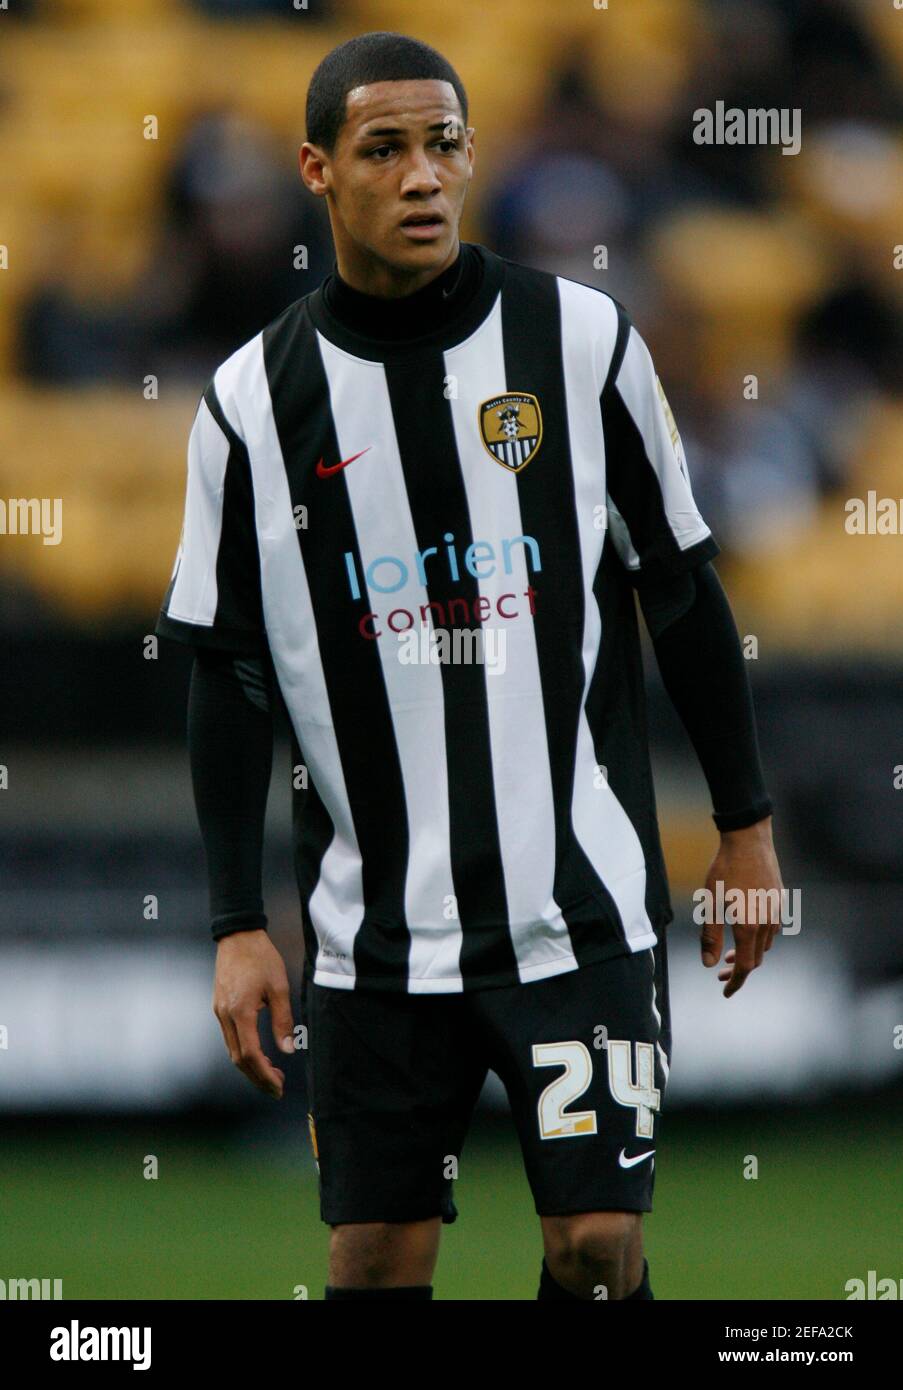 Football - Notts County v Gateshead - FA Cup First Round - Meadow Lane -  10/11 - 6/11/10 Thomas Ince - Notts County Mandatory Credit: Action Images  / Peter Ford Stock Photo - Alamy